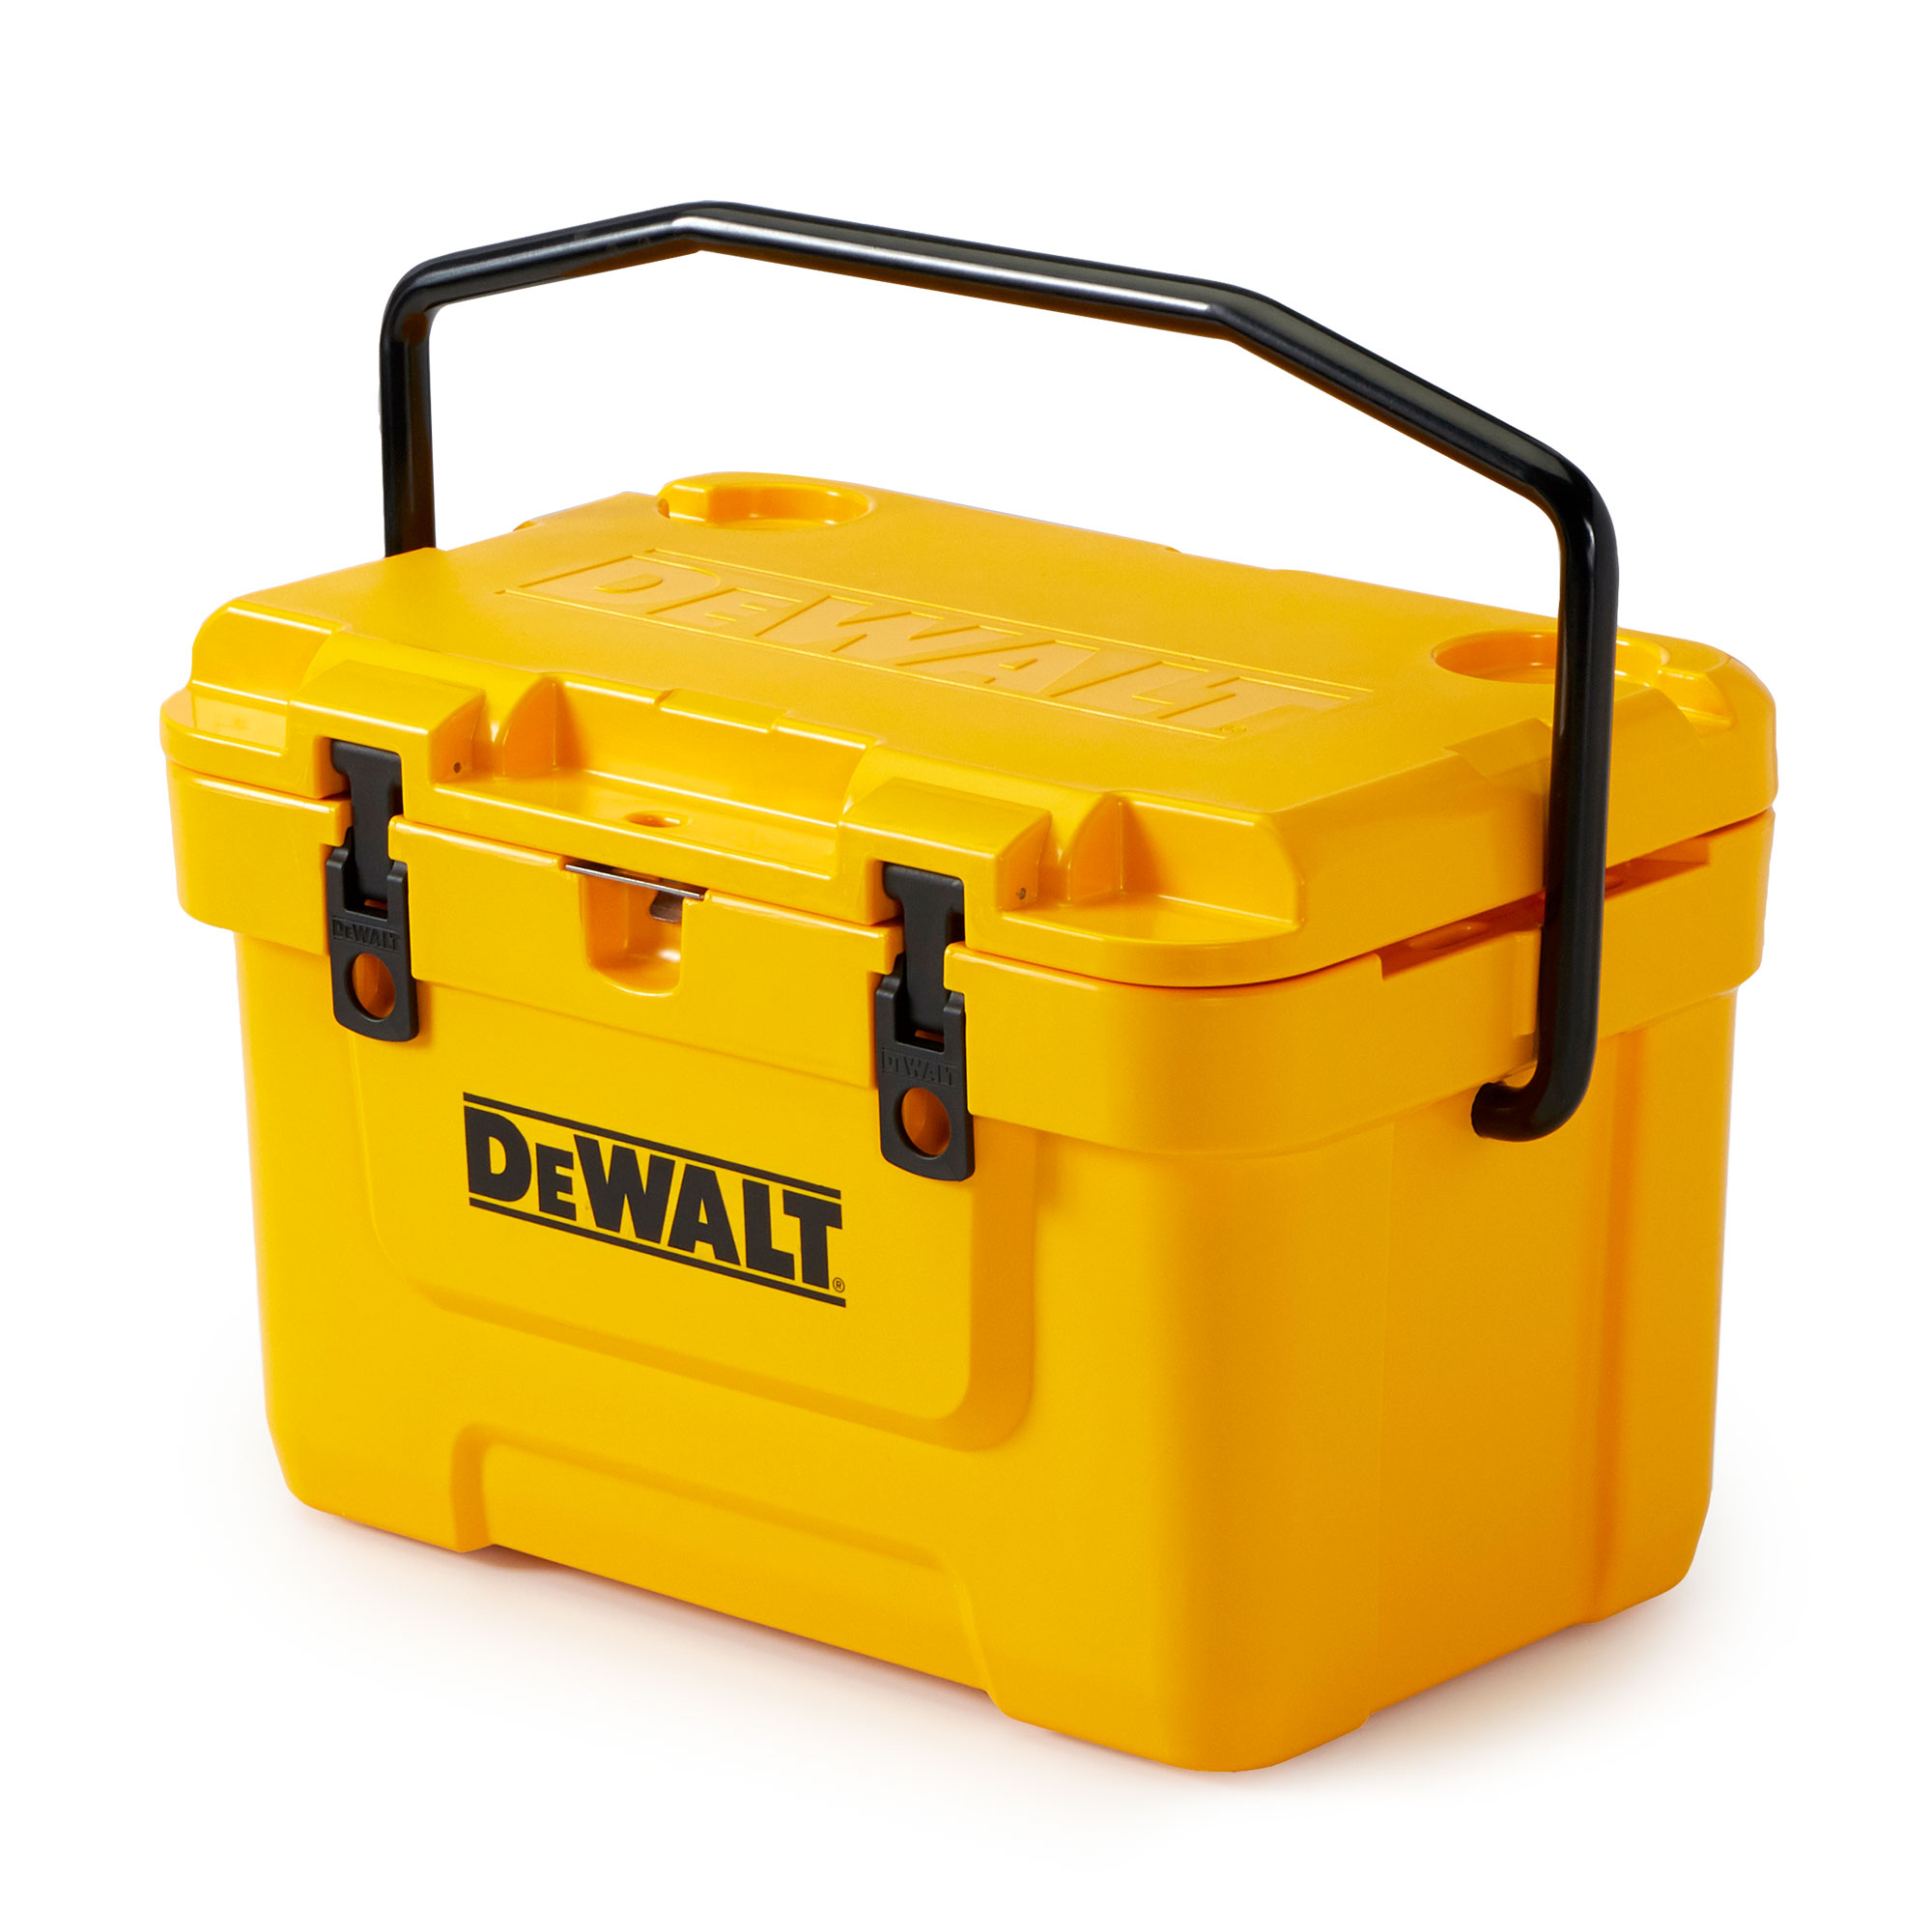 DeWalt 25 Quart Roto Molded Insulated Lunch Box Portable Drink Cooler, Yellow - image 1 of 7